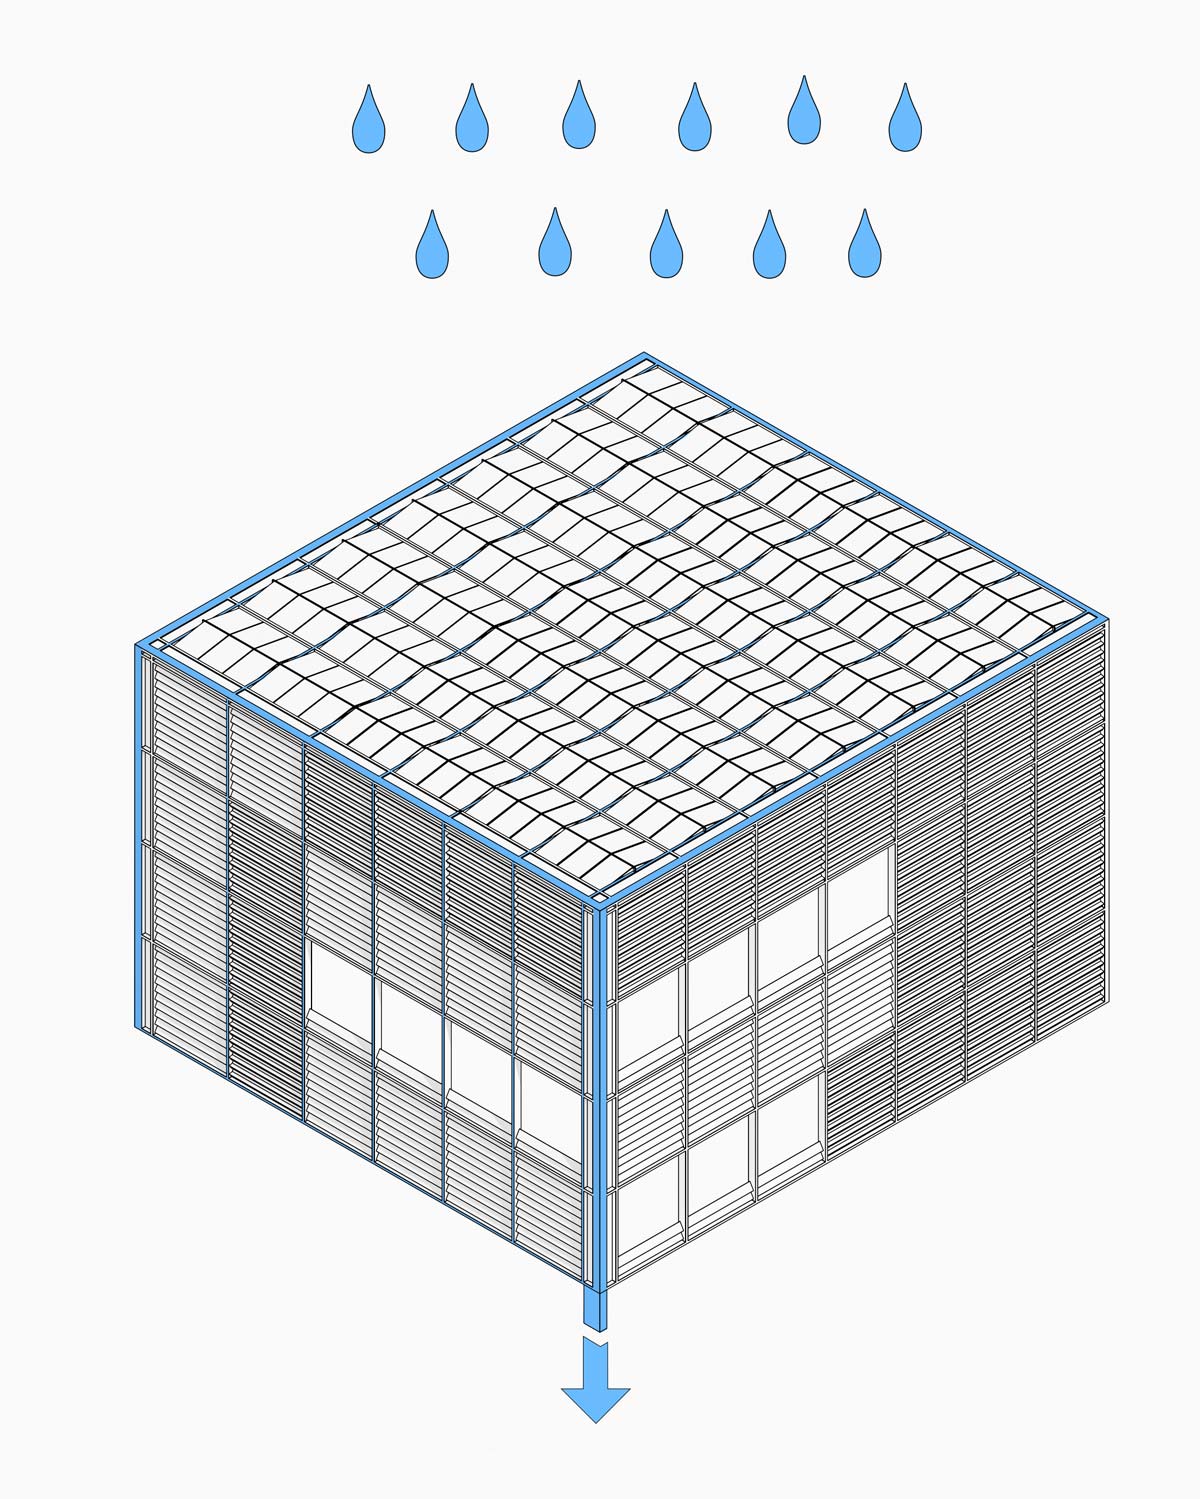 Rendering of the climate shell’s function to harvest rain water.